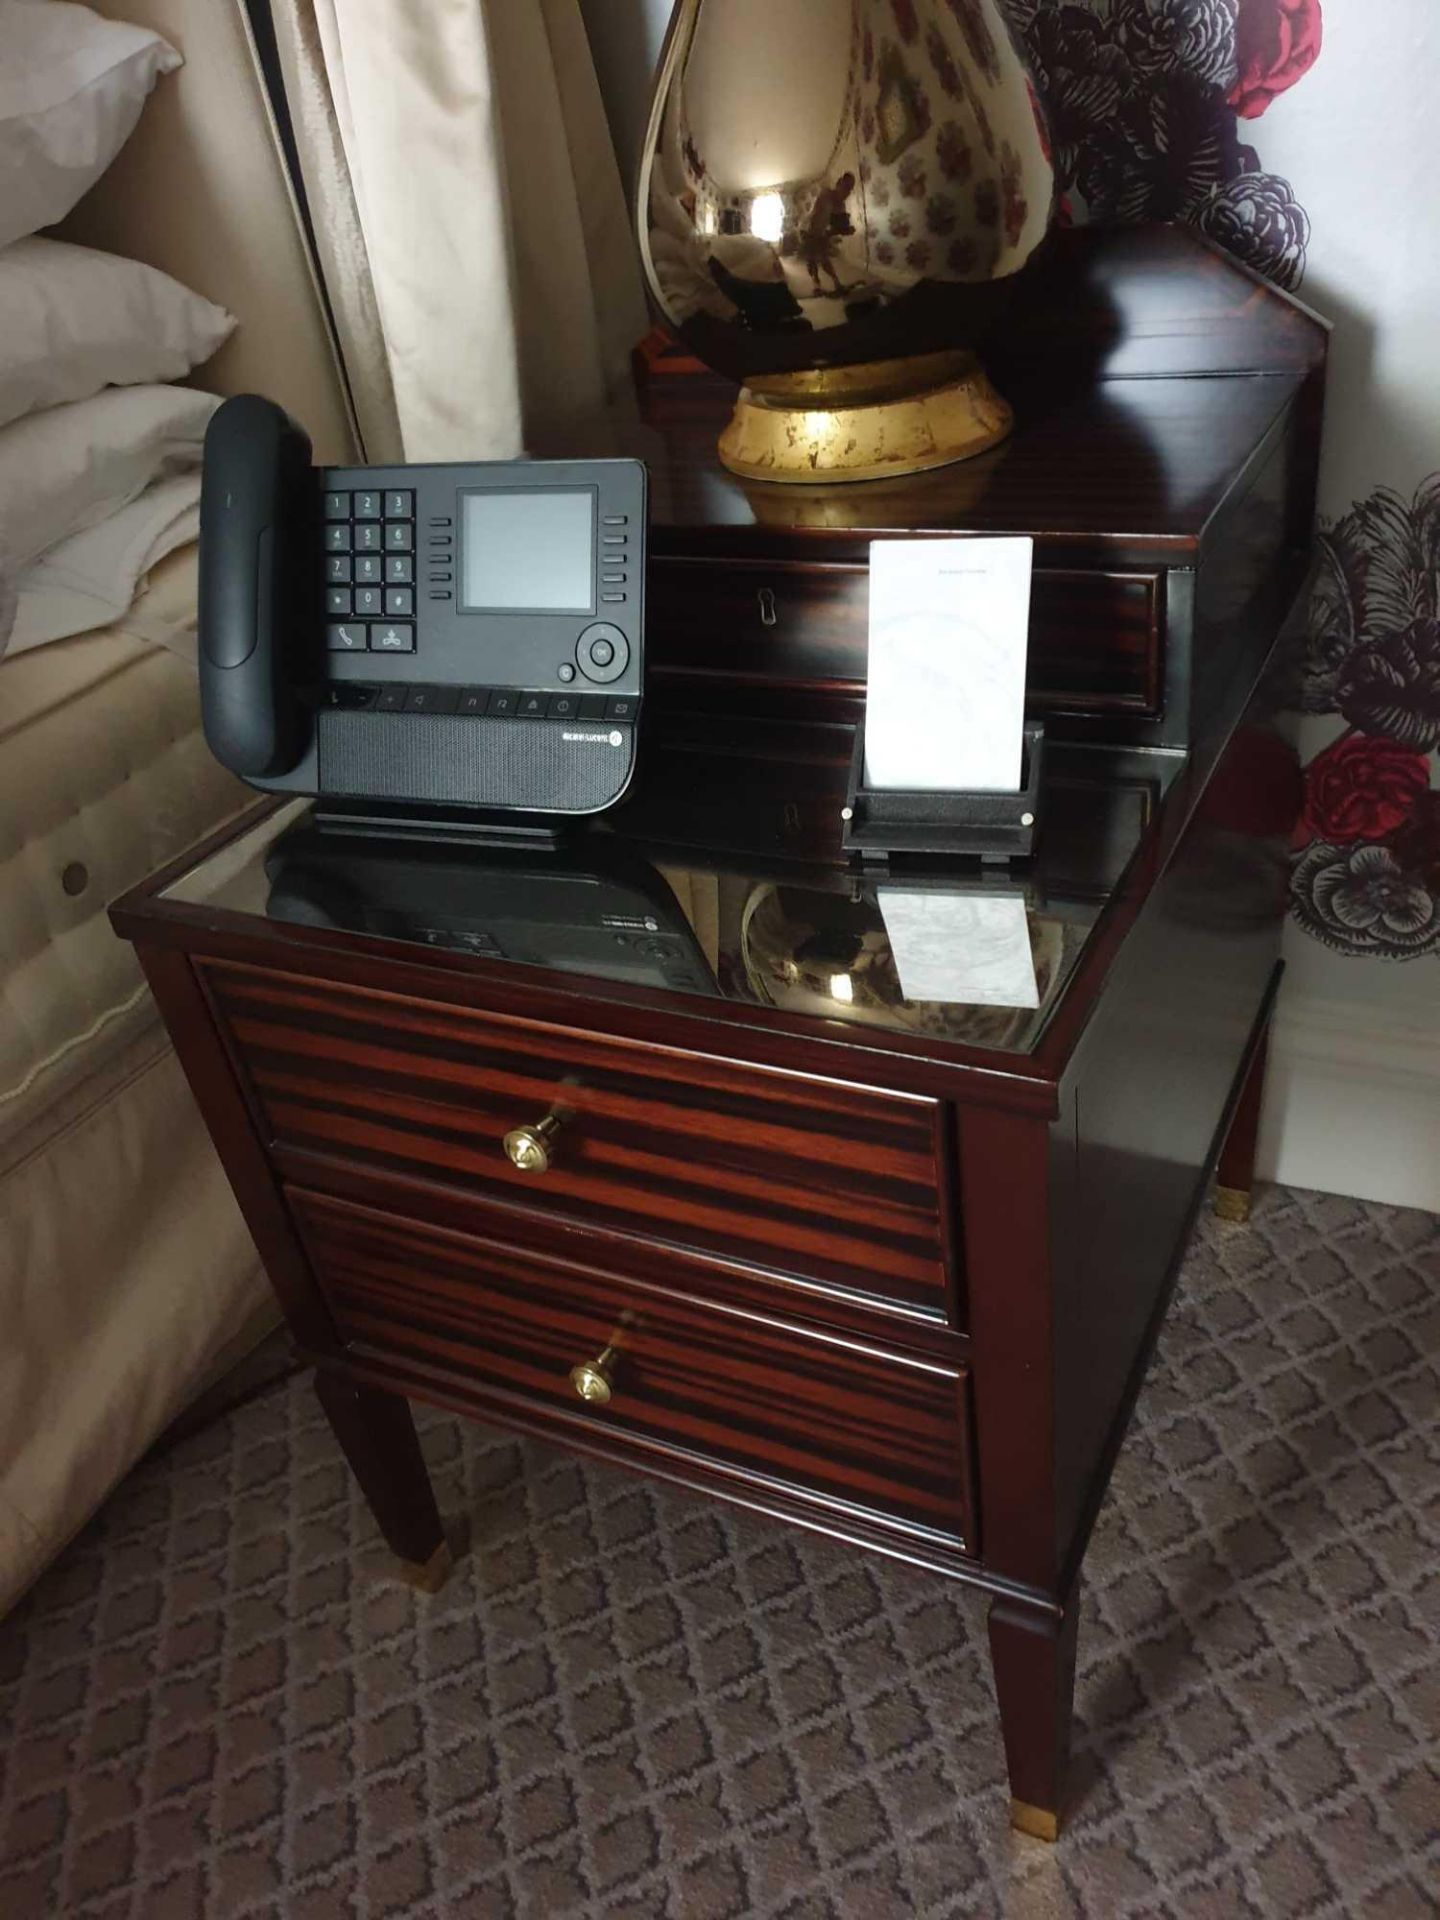 A Pair Of Two Tier Bedside Nightstands With Antiqued Plate Top With Storage Compartments Mounted - Image 2 of 2